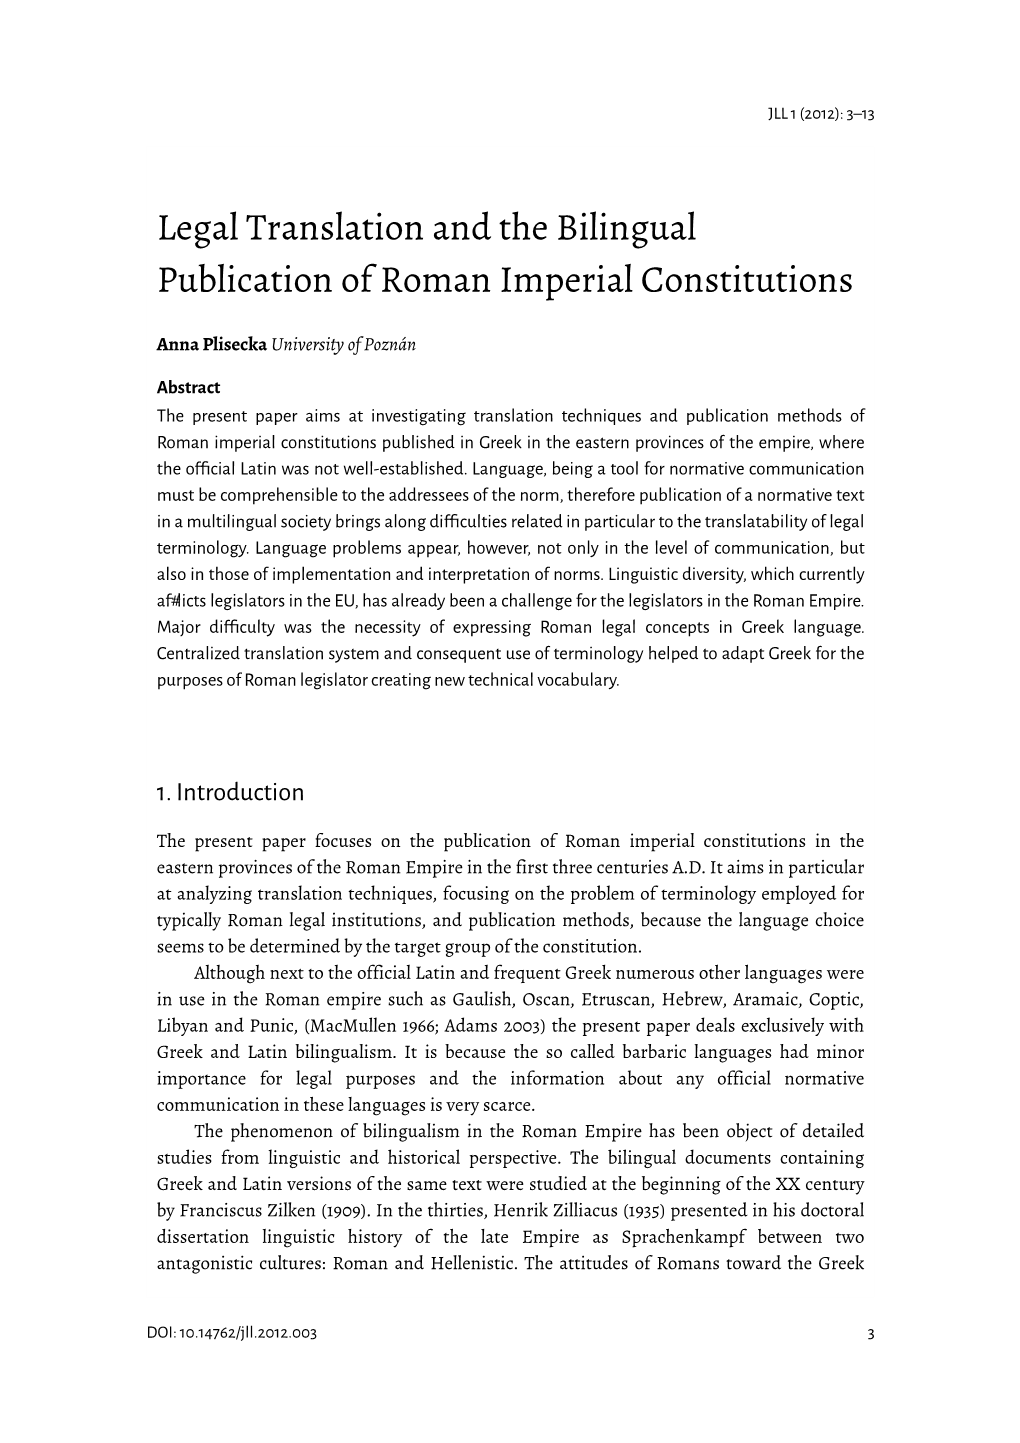 Legal Translation and the Bilingual Publication of Roman Imperial Constitutions